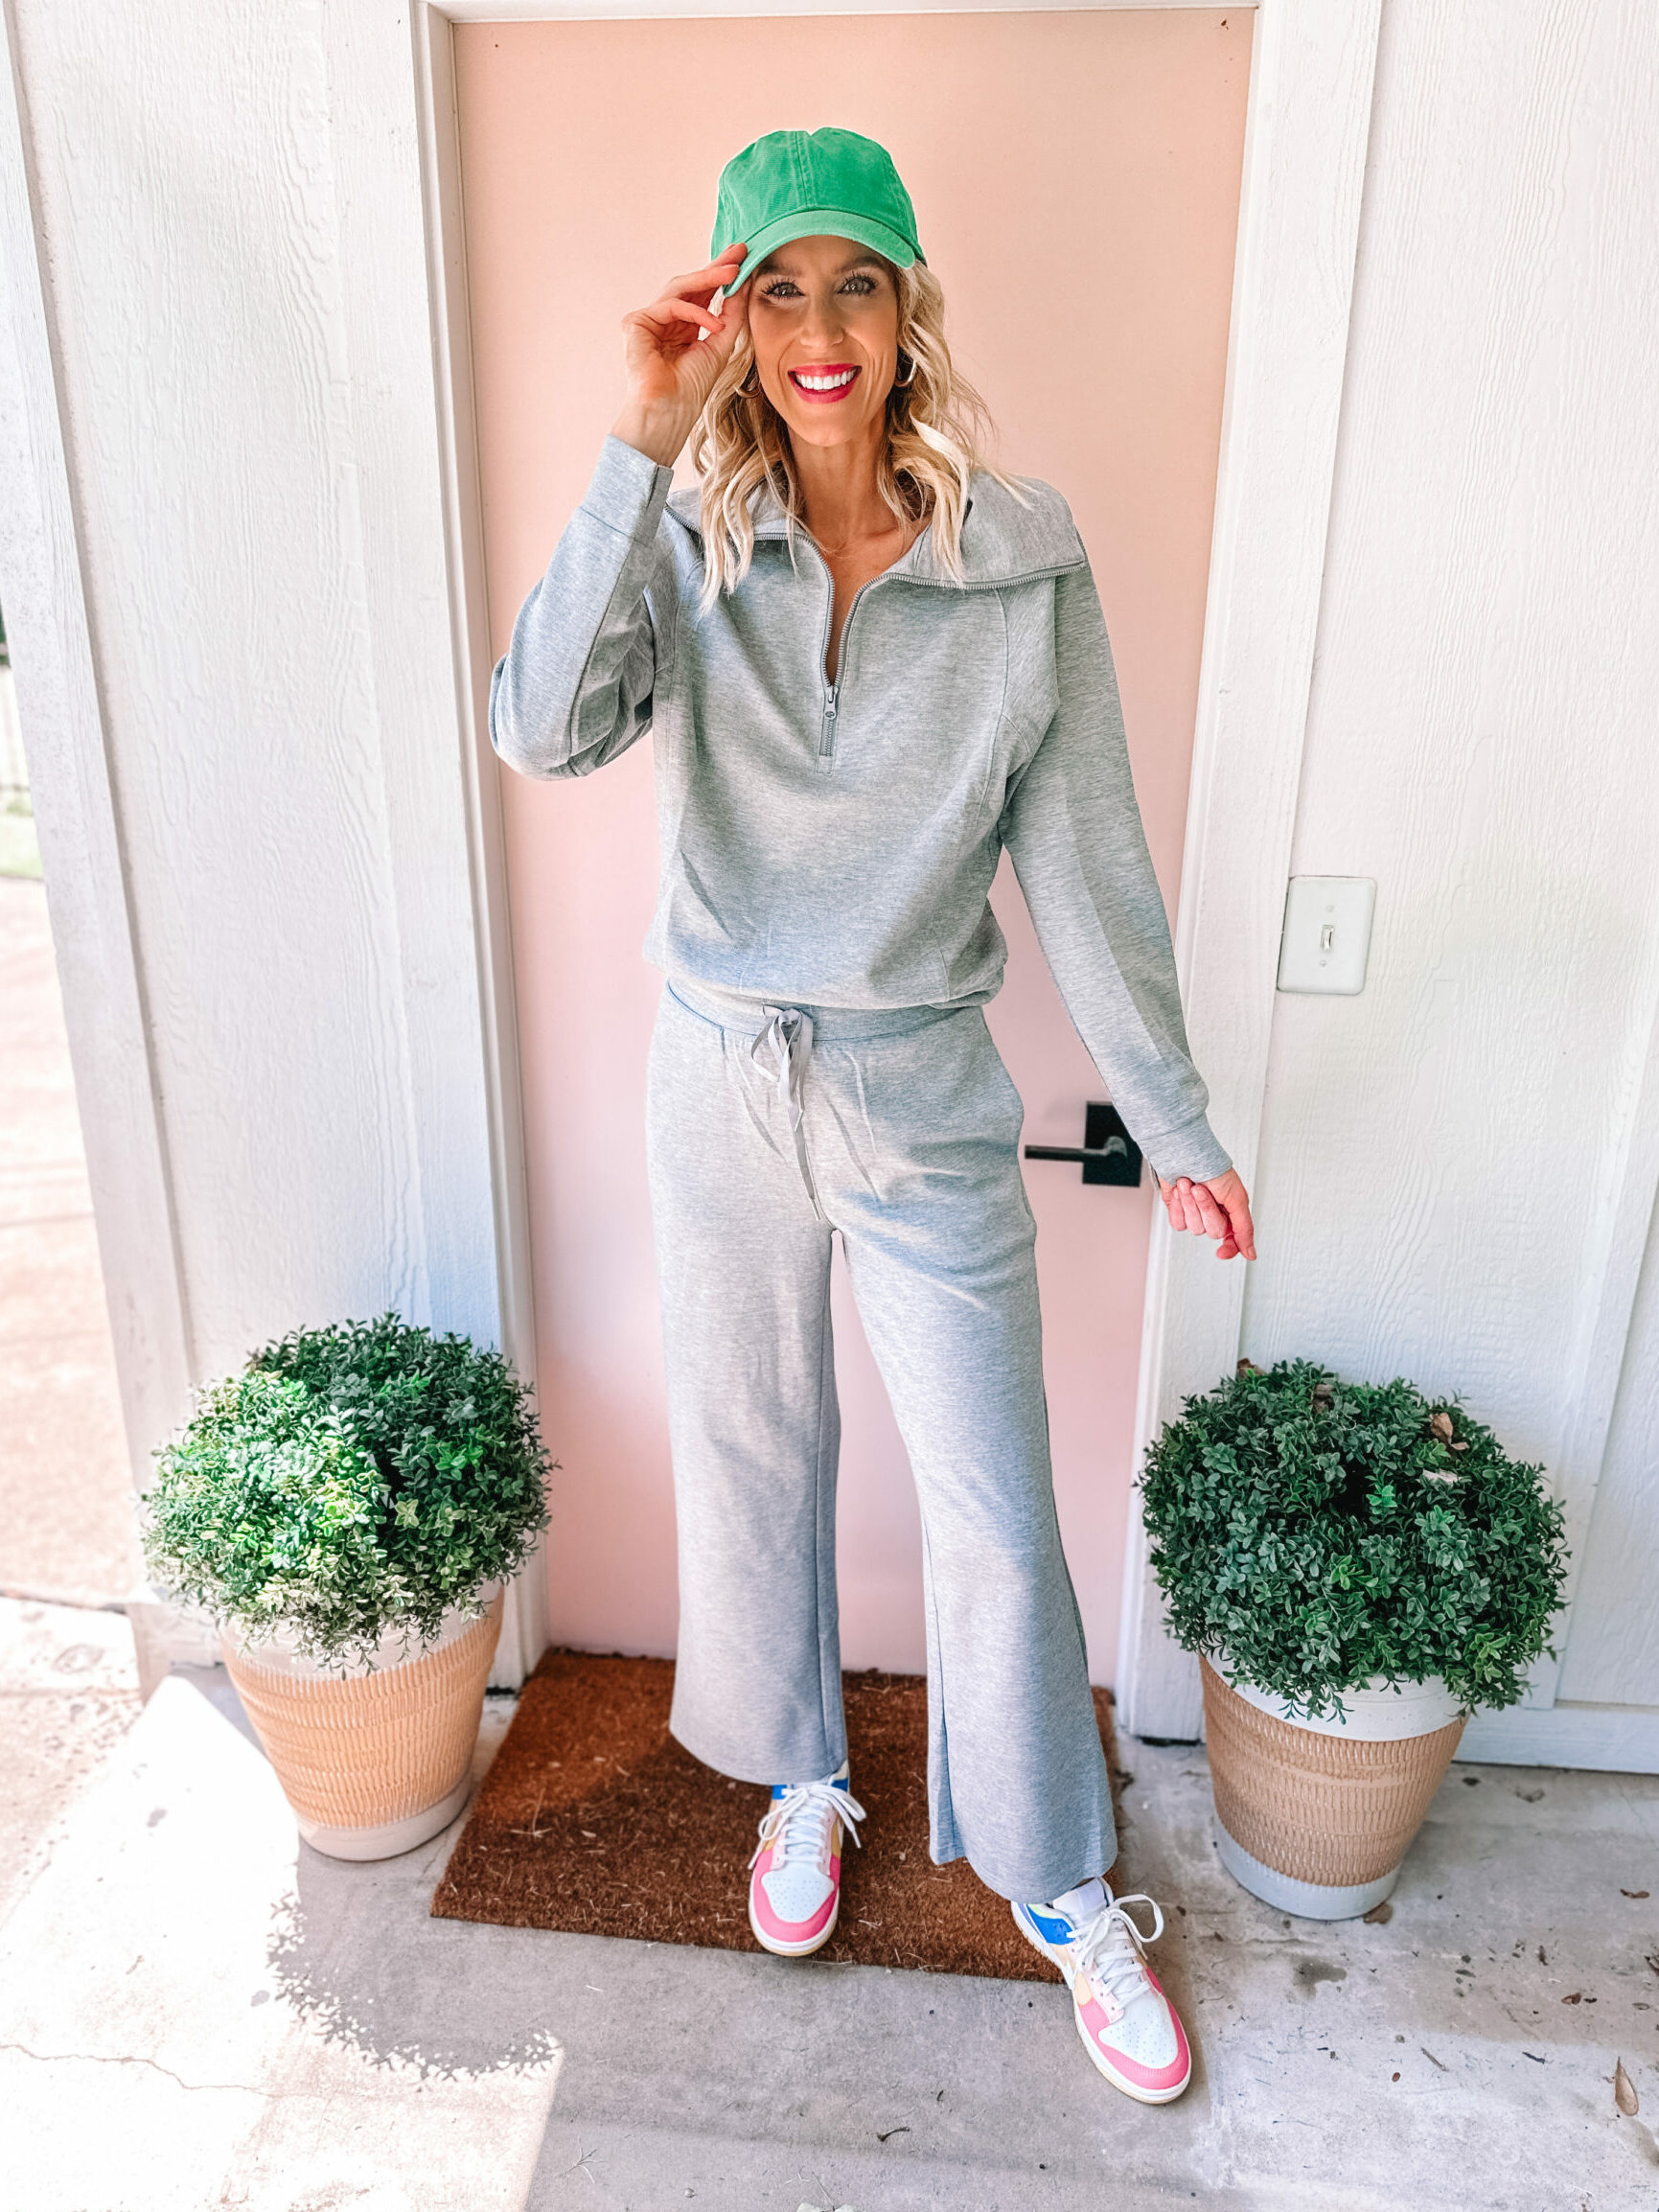 10 matching sets from brands like Target and Madewell